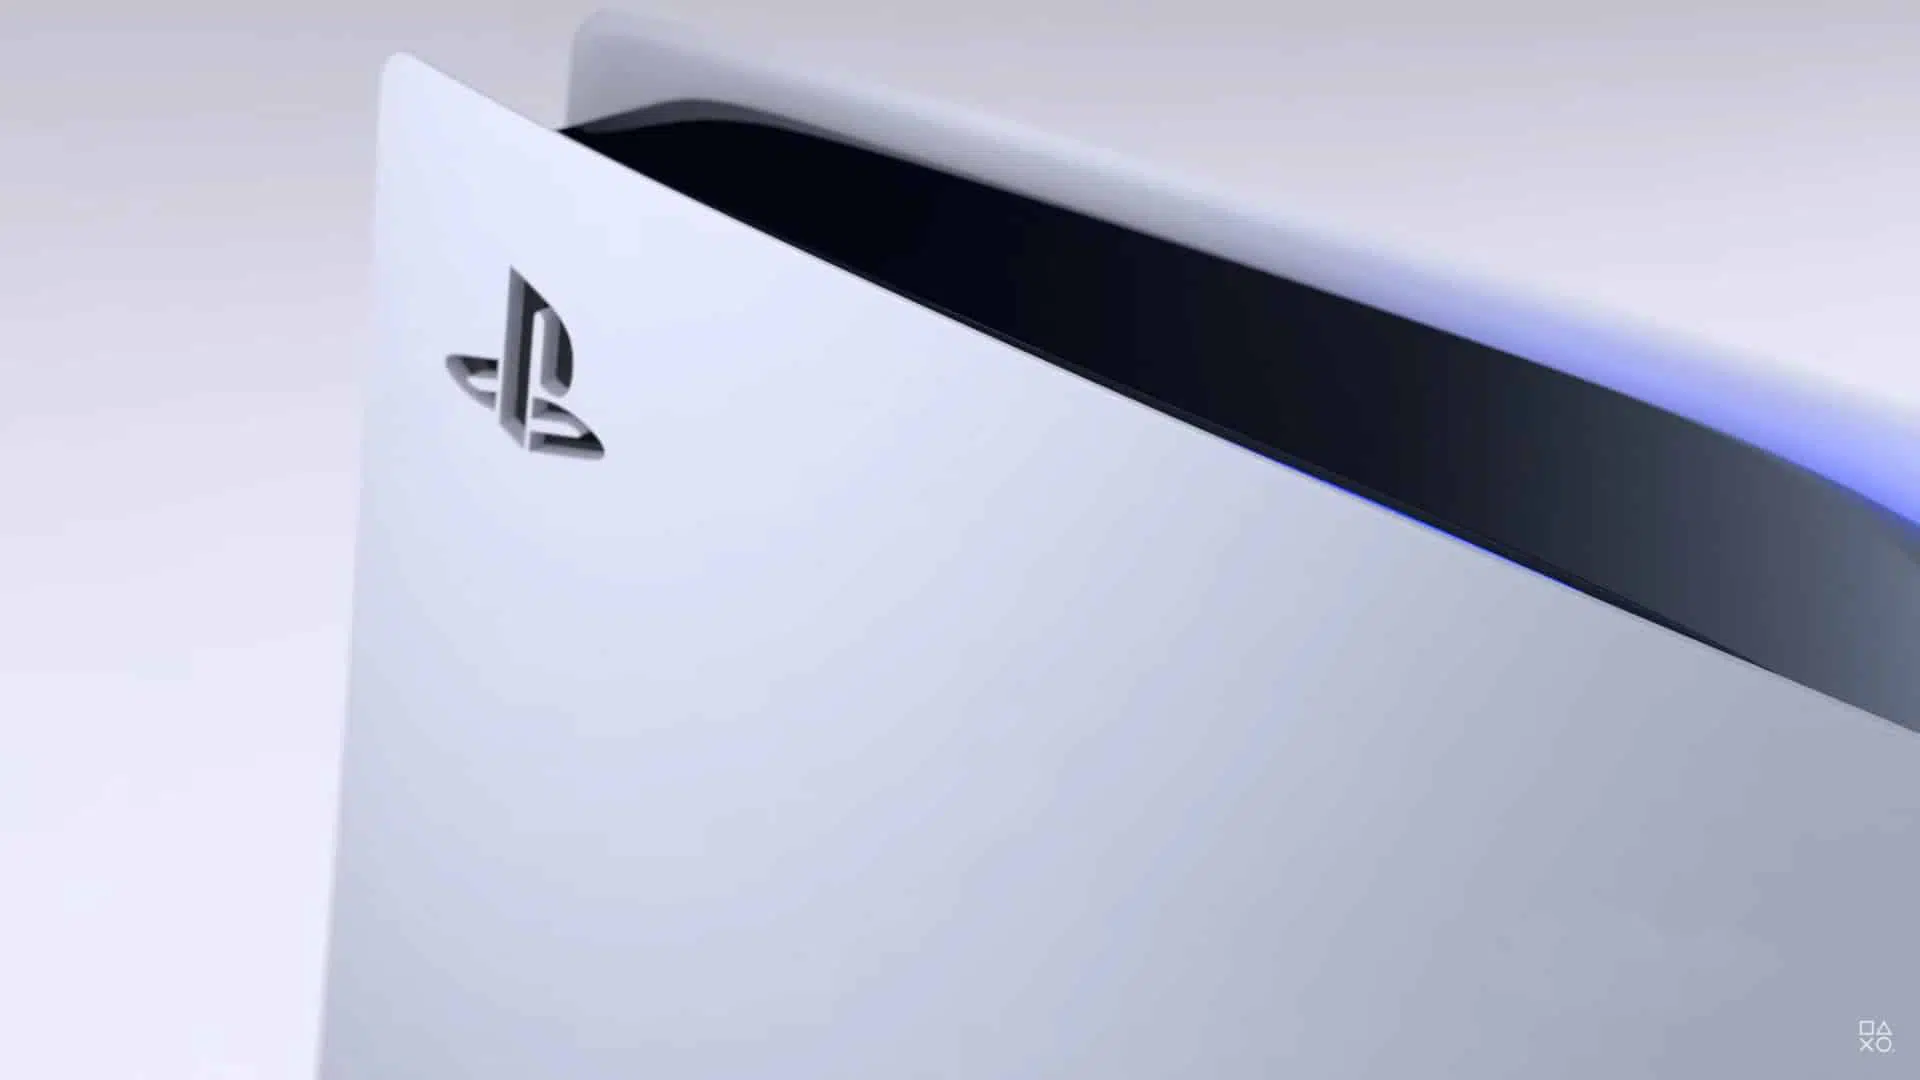 PS5, Sony console